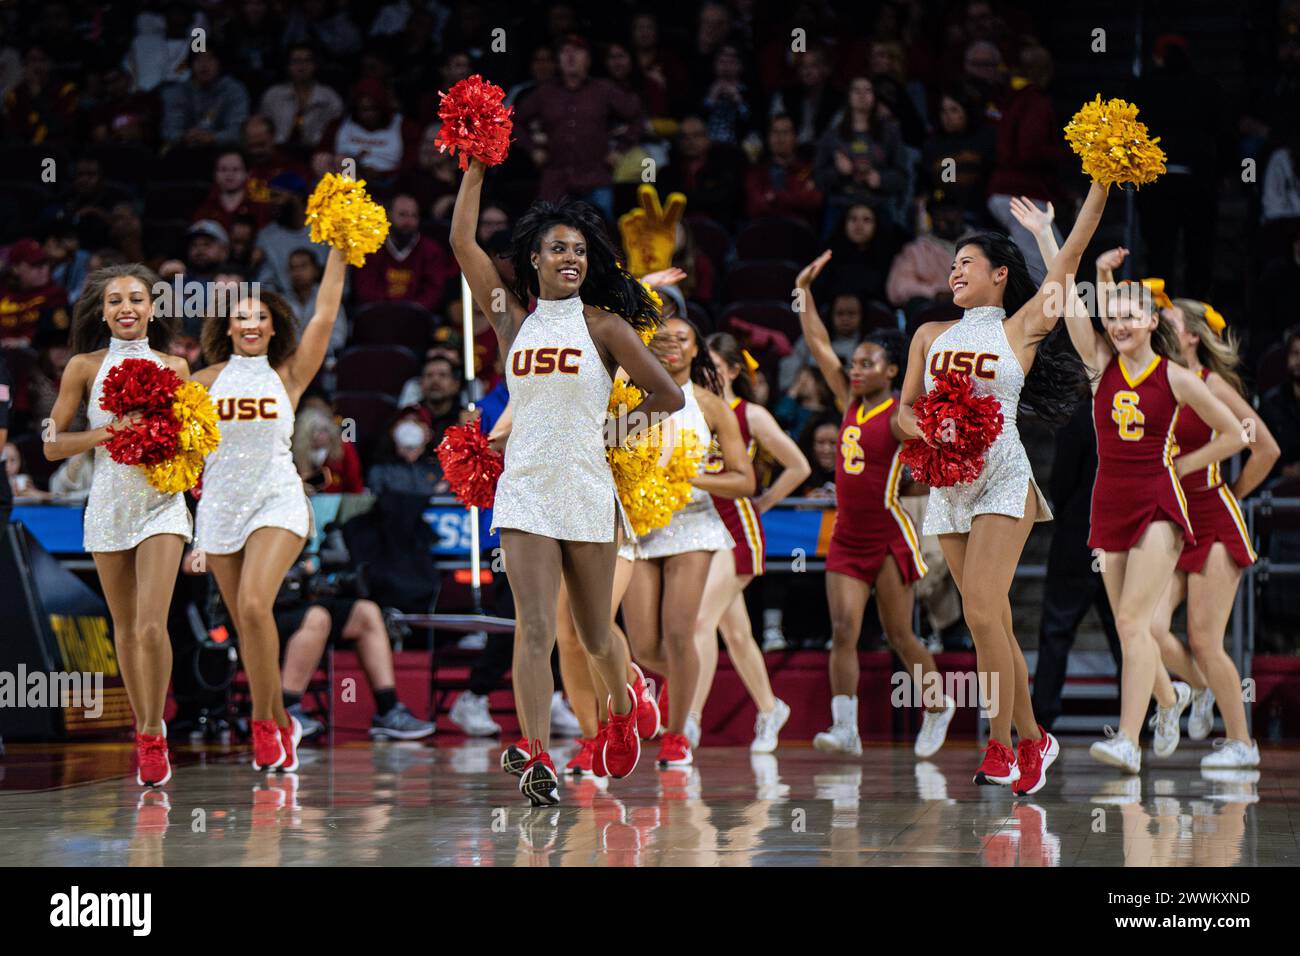 USC Trojans cheerleaders during the first round of NCAA women’s basketball championship game against the Texas A&M-CC Islanders, Saturday, March 23, 2 Stock Photo